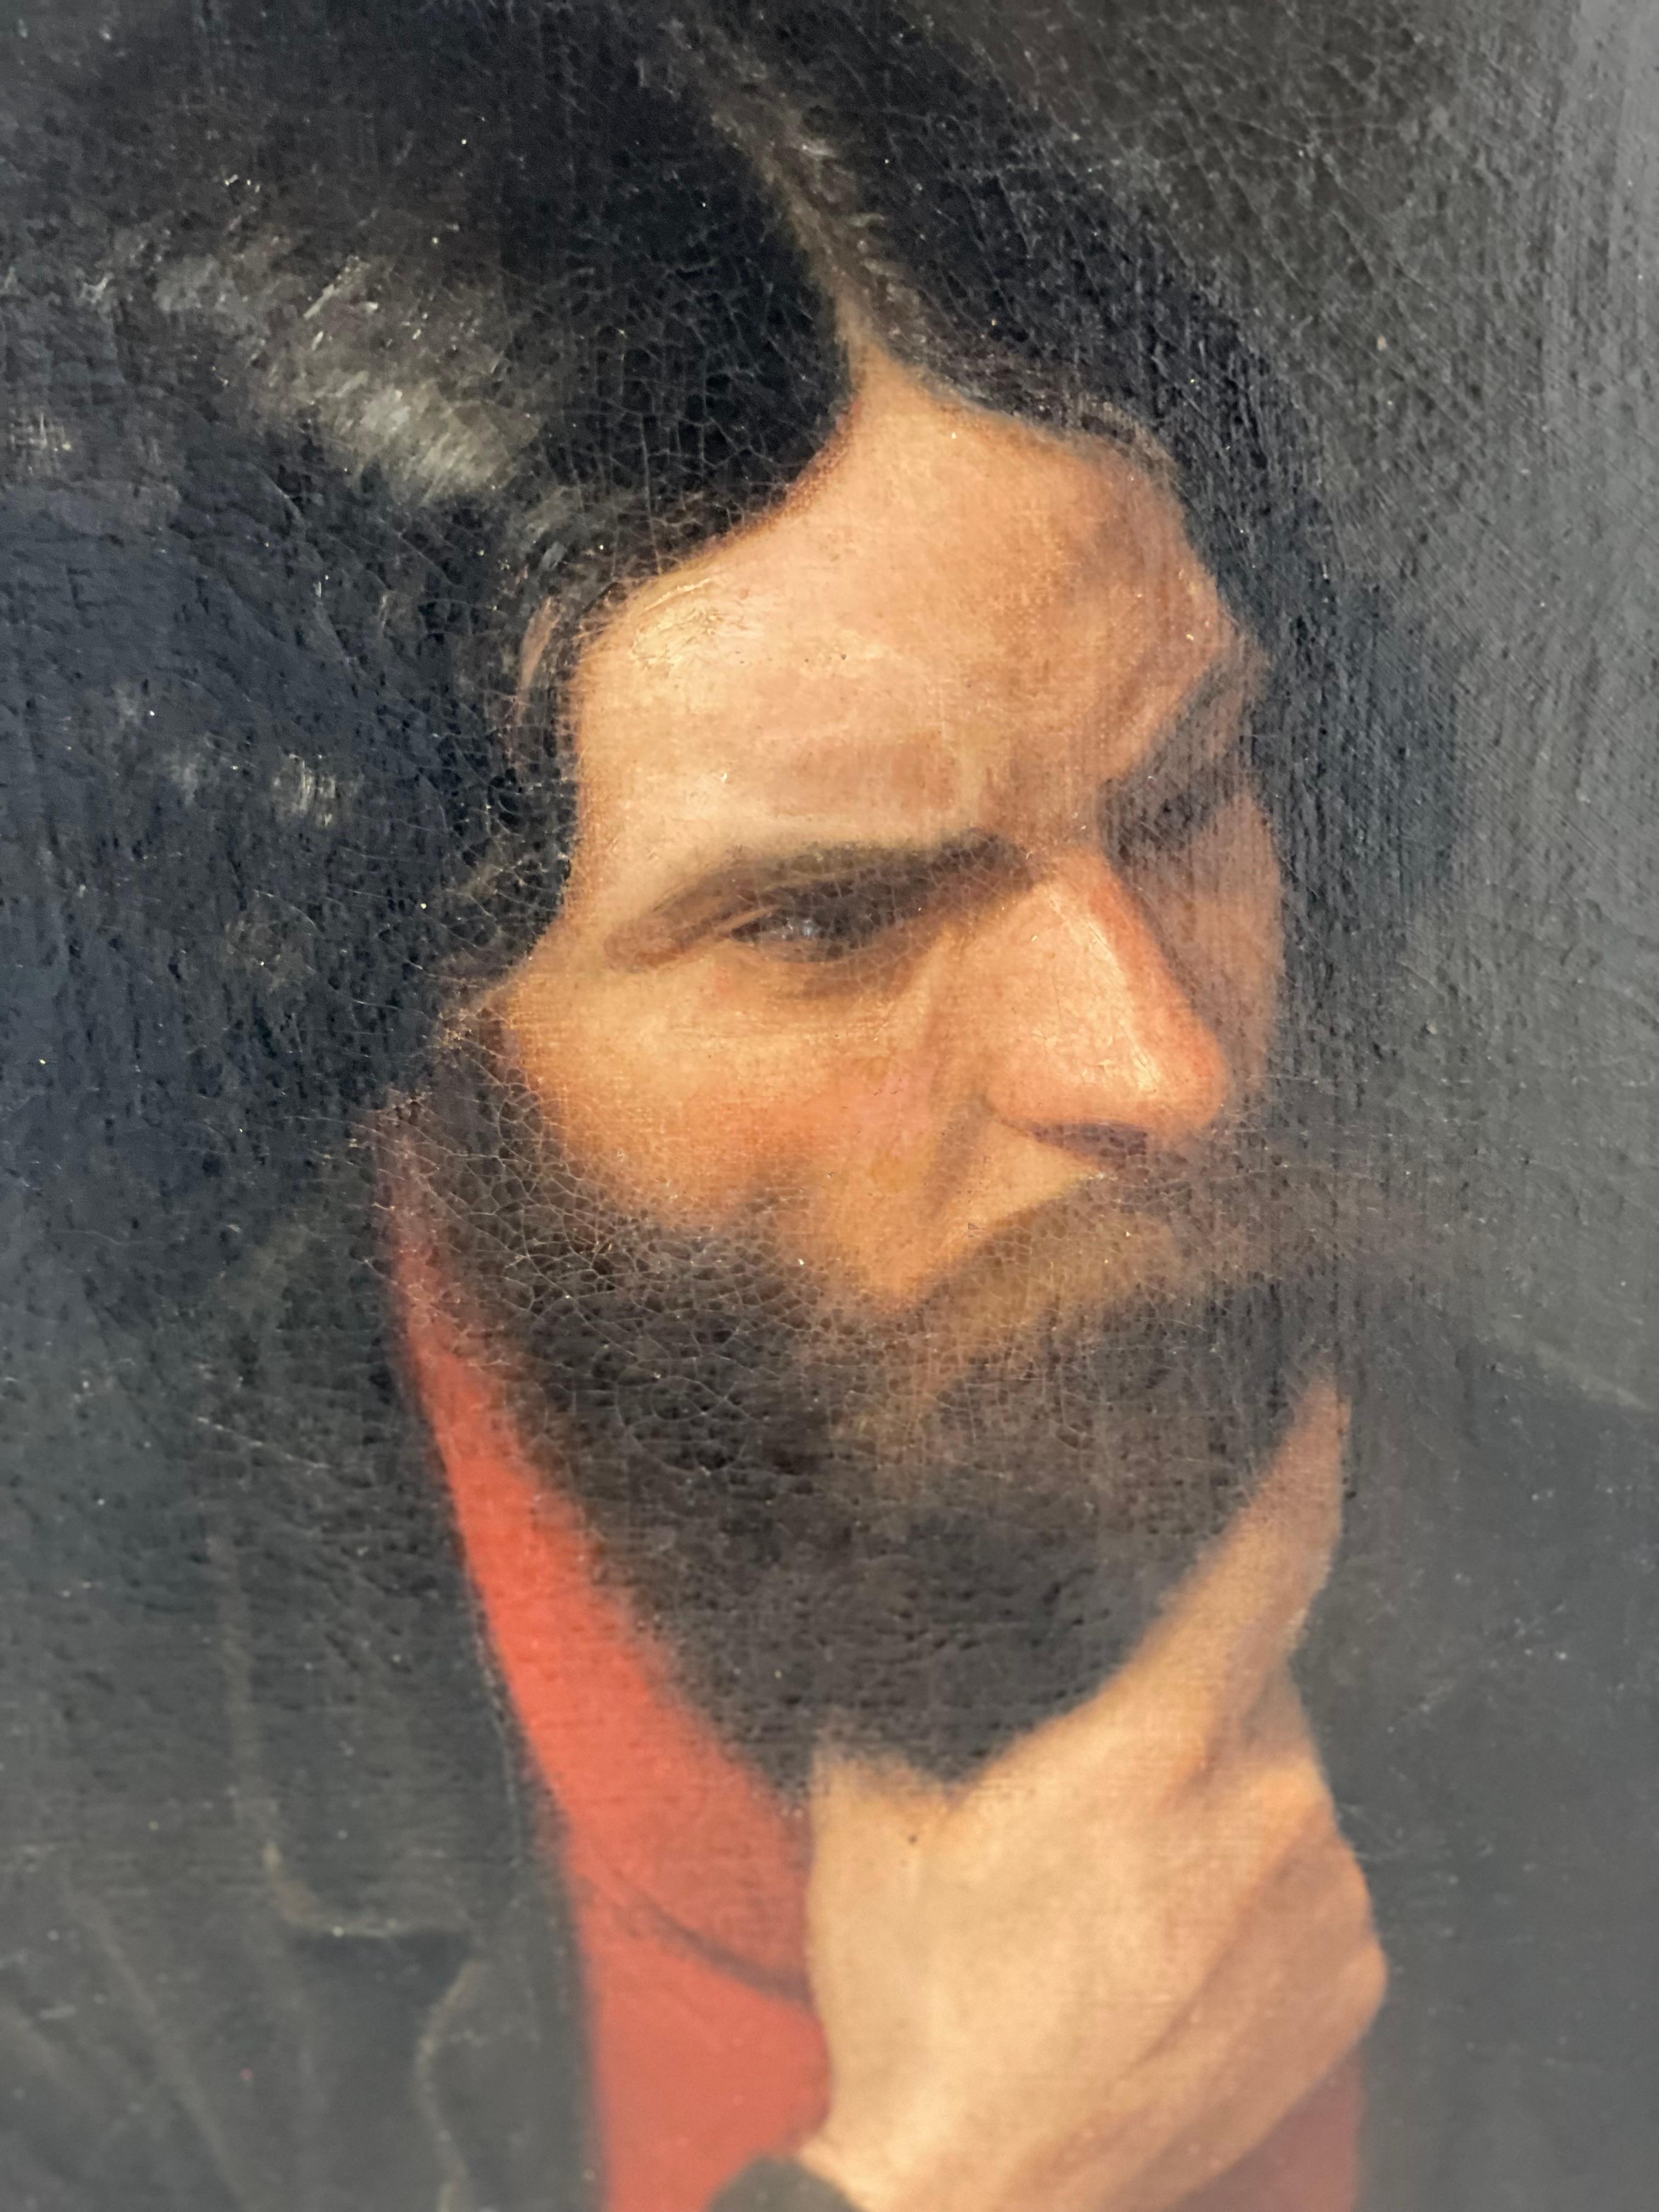 Oil on canvas represents a thinking man. The man in the dark background wearing a dark jacket; a chiaroscuro work is fascinating. The brilliance of the red coat is central. The subject's hand holding his beard, the head slightly tilted, and the